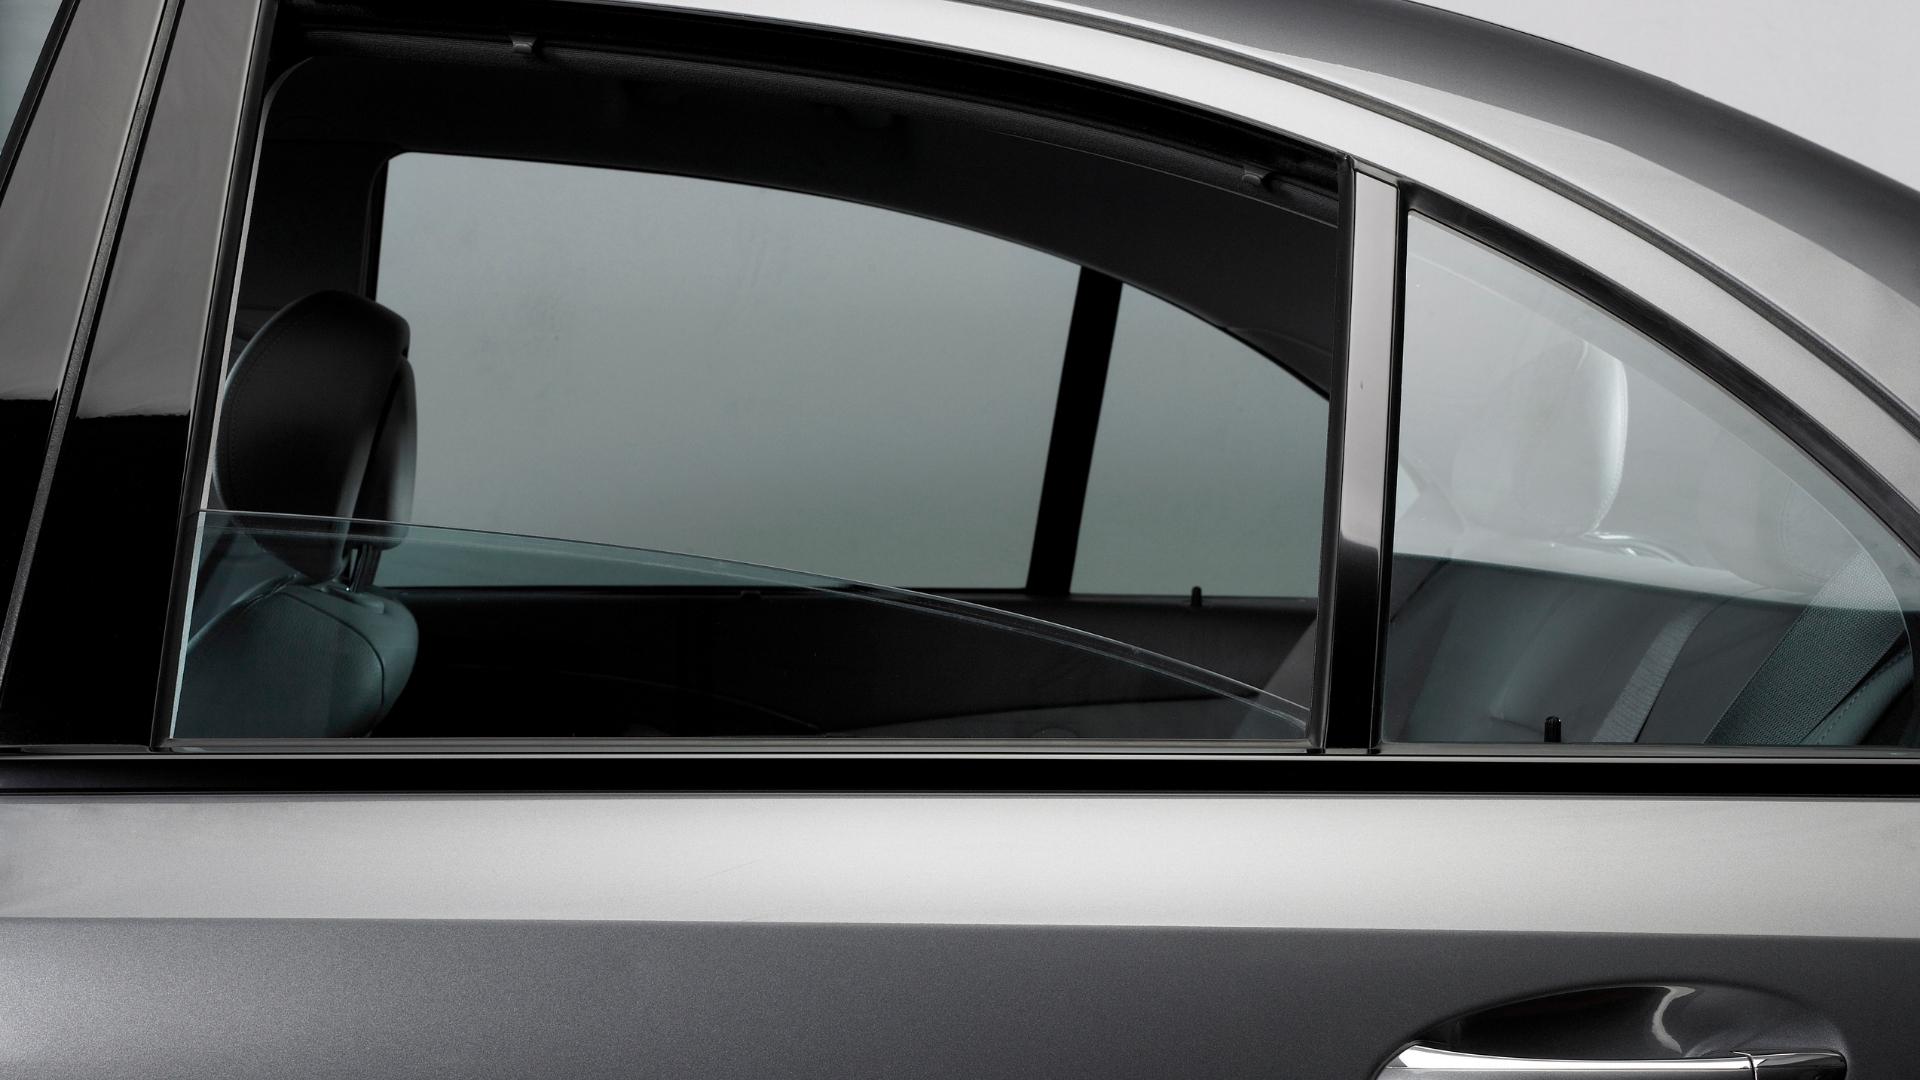 Acoustic rear side window on a modern vehicle, close up look